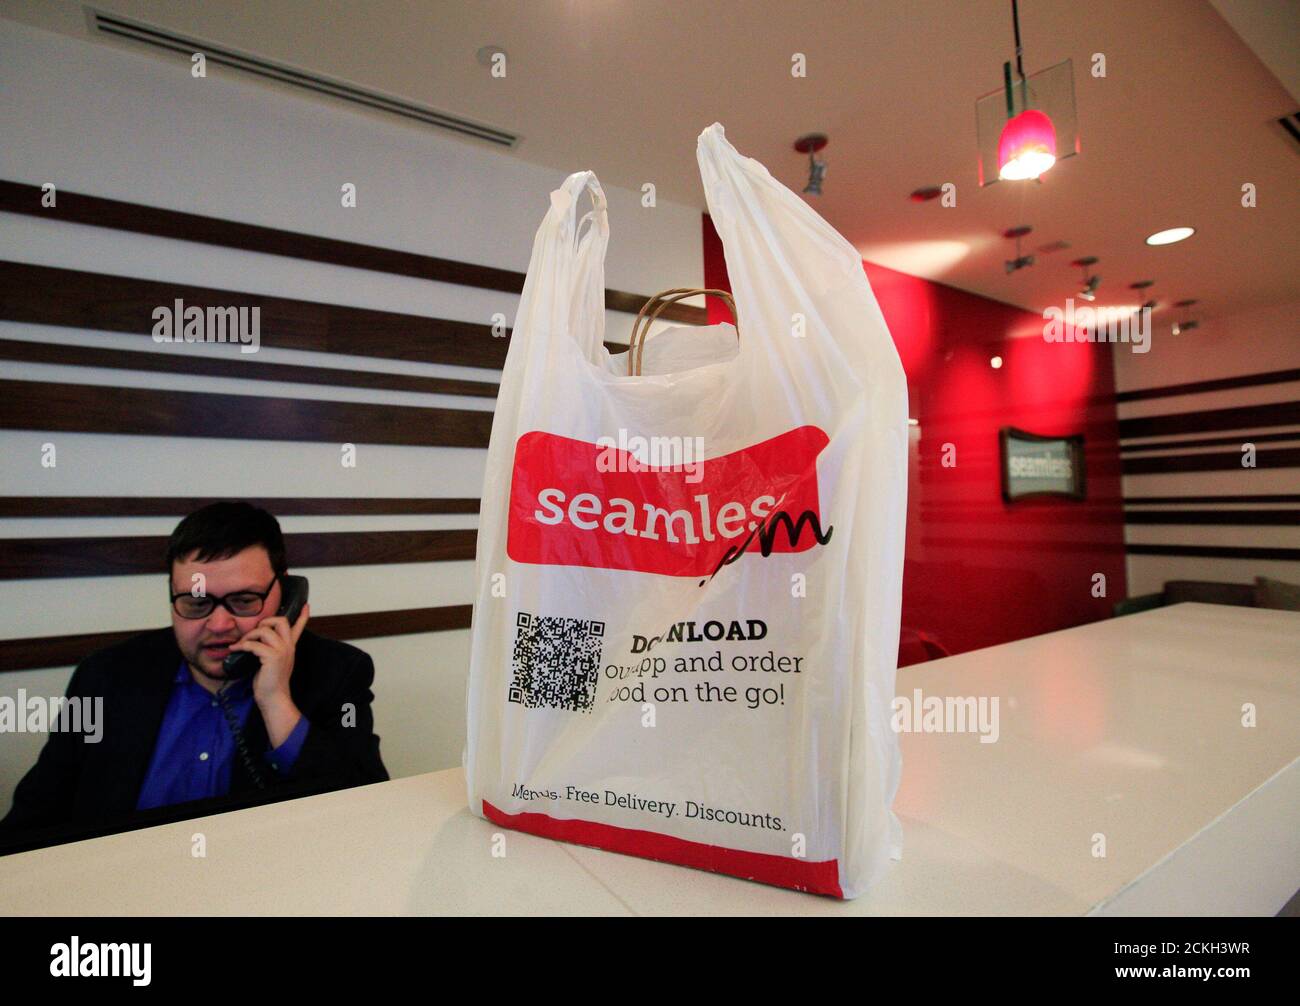 A man speaks on the phone next to a take-out bag at the reception desk at the offices of Seamless in New York January 10, 2012. Online delivery service Seamless is partnered with restaurants in over 30 major cities across the U.S. and Britain.  REUTERS/Brendan McDermid (UNITED STATES - Tags: BUSINESS FOOD) DRINK) Stock Photo